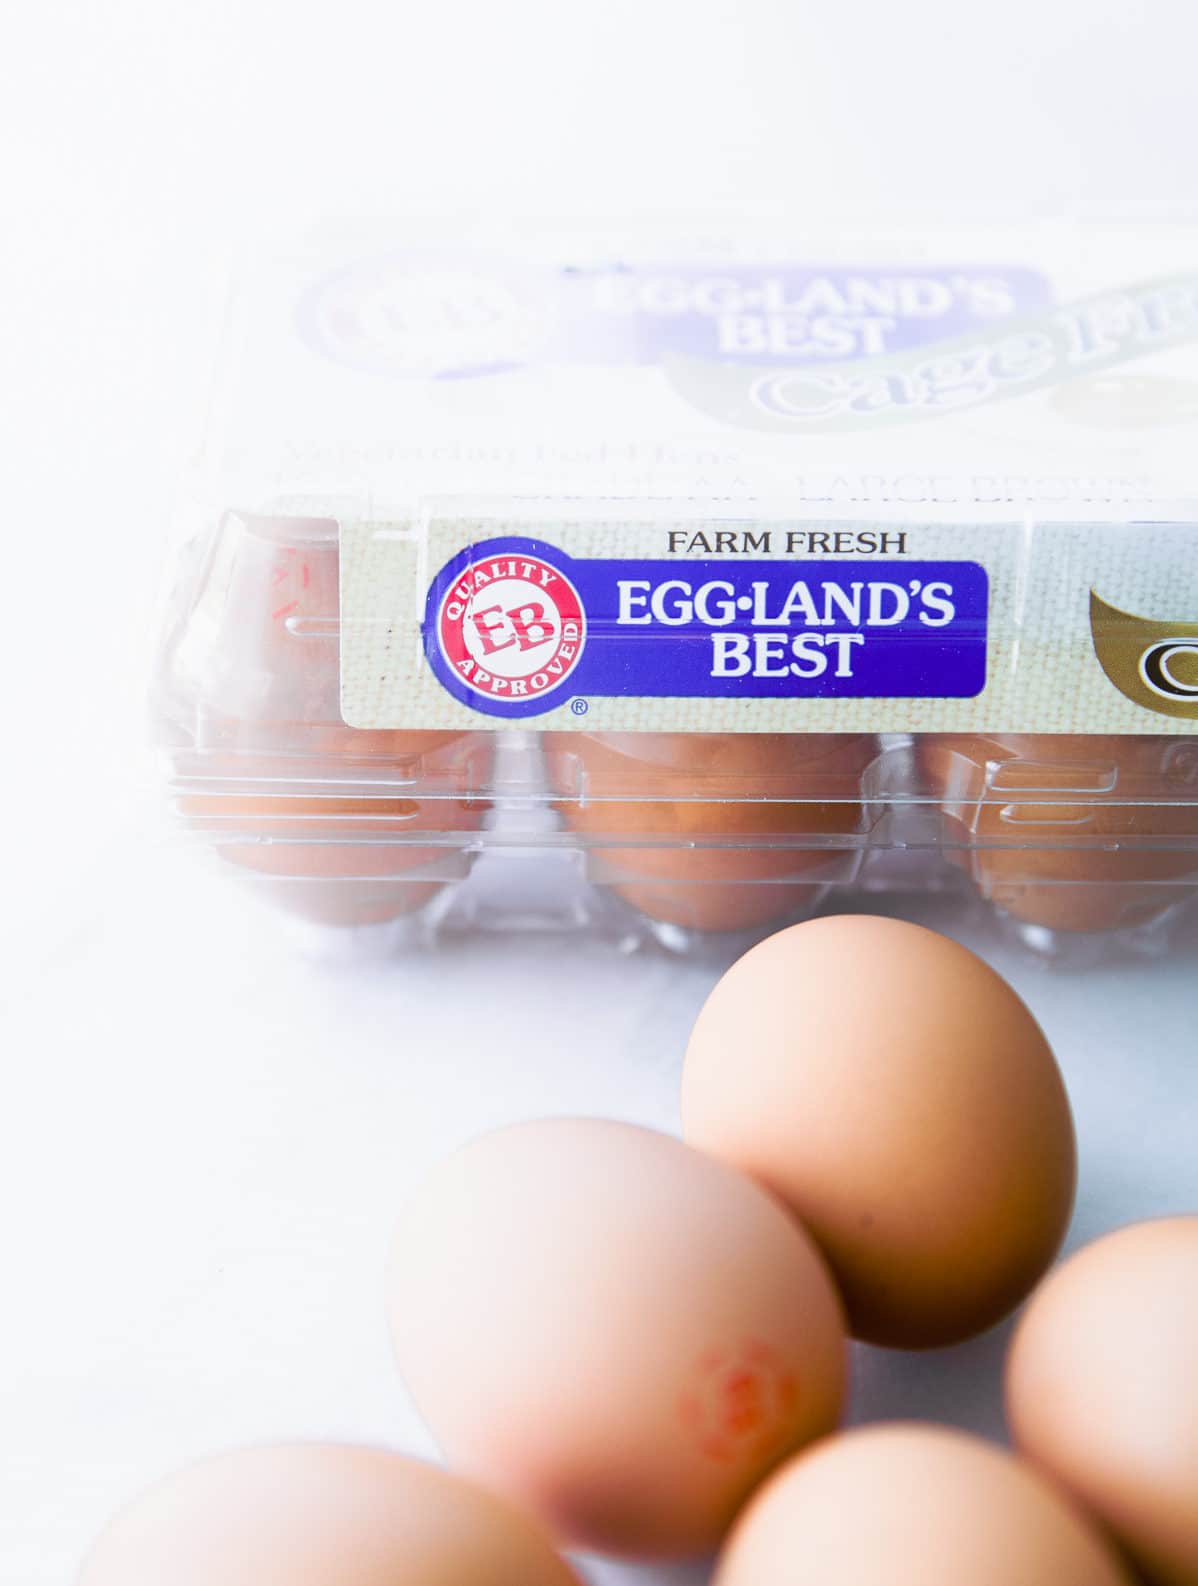 Eggland's Best egg carton in background with brown eggs on counter in foreground.